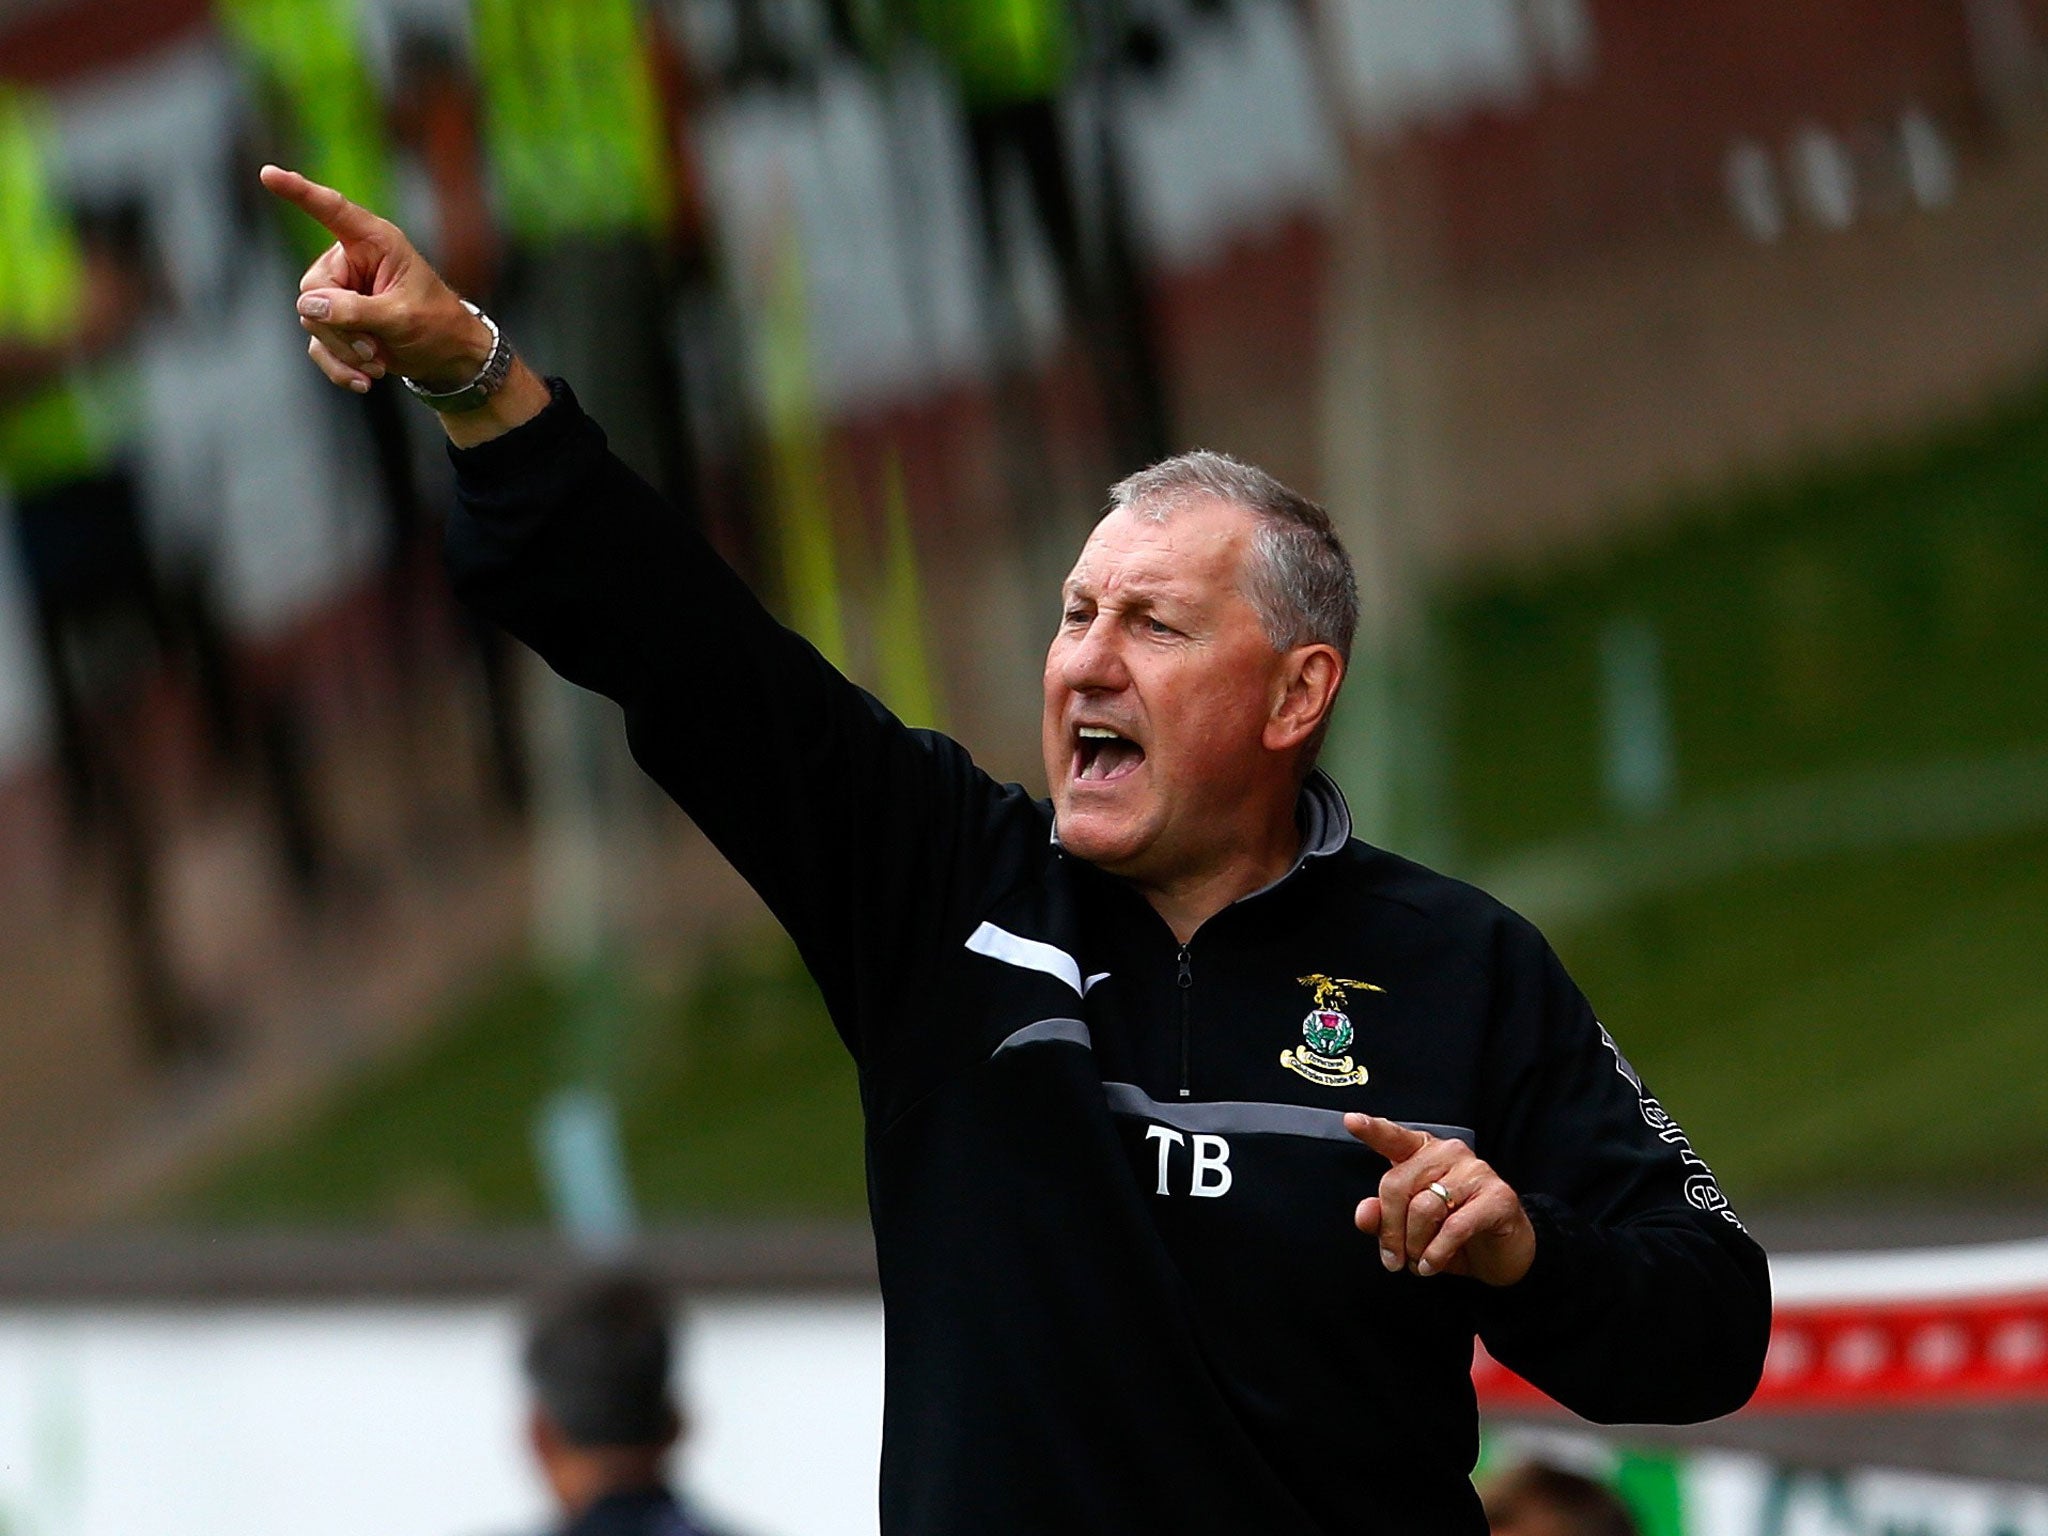 Terry Butcher's Inverness Caledonian Thistle are the early-season pacesetters in the Scottish Premier League